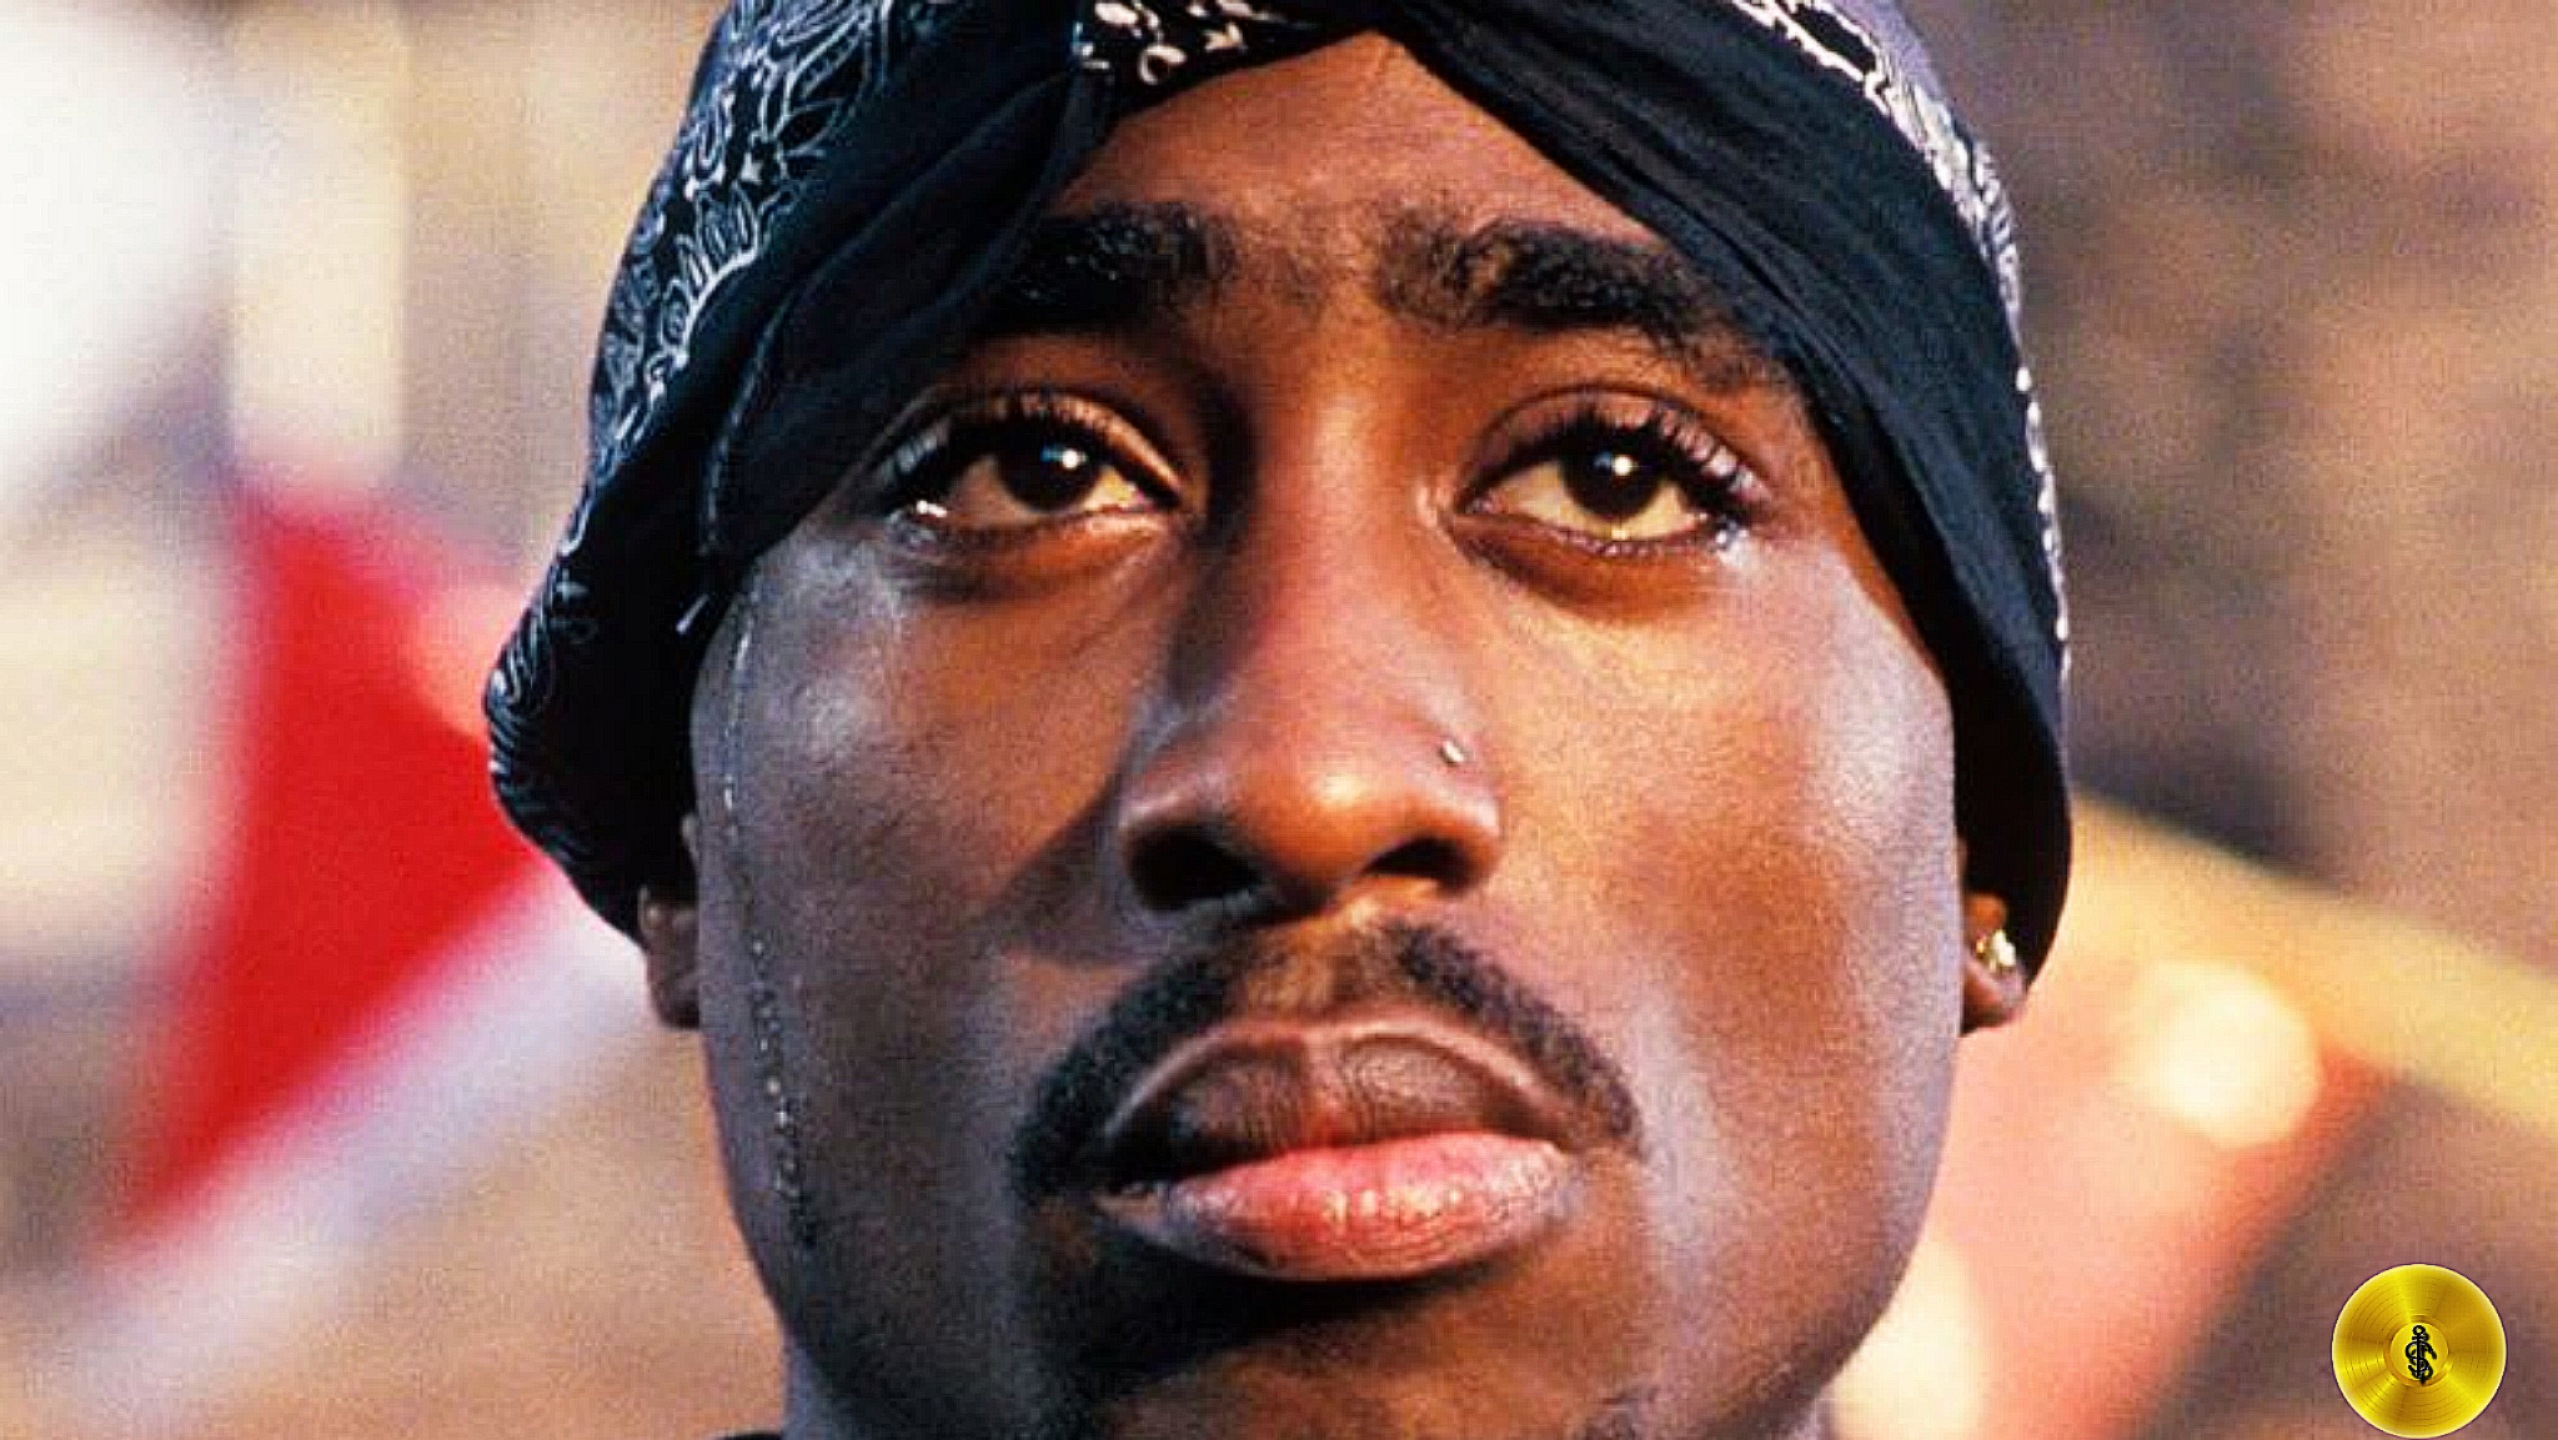 What If: 2Pac Survived & Lived Past 1996?